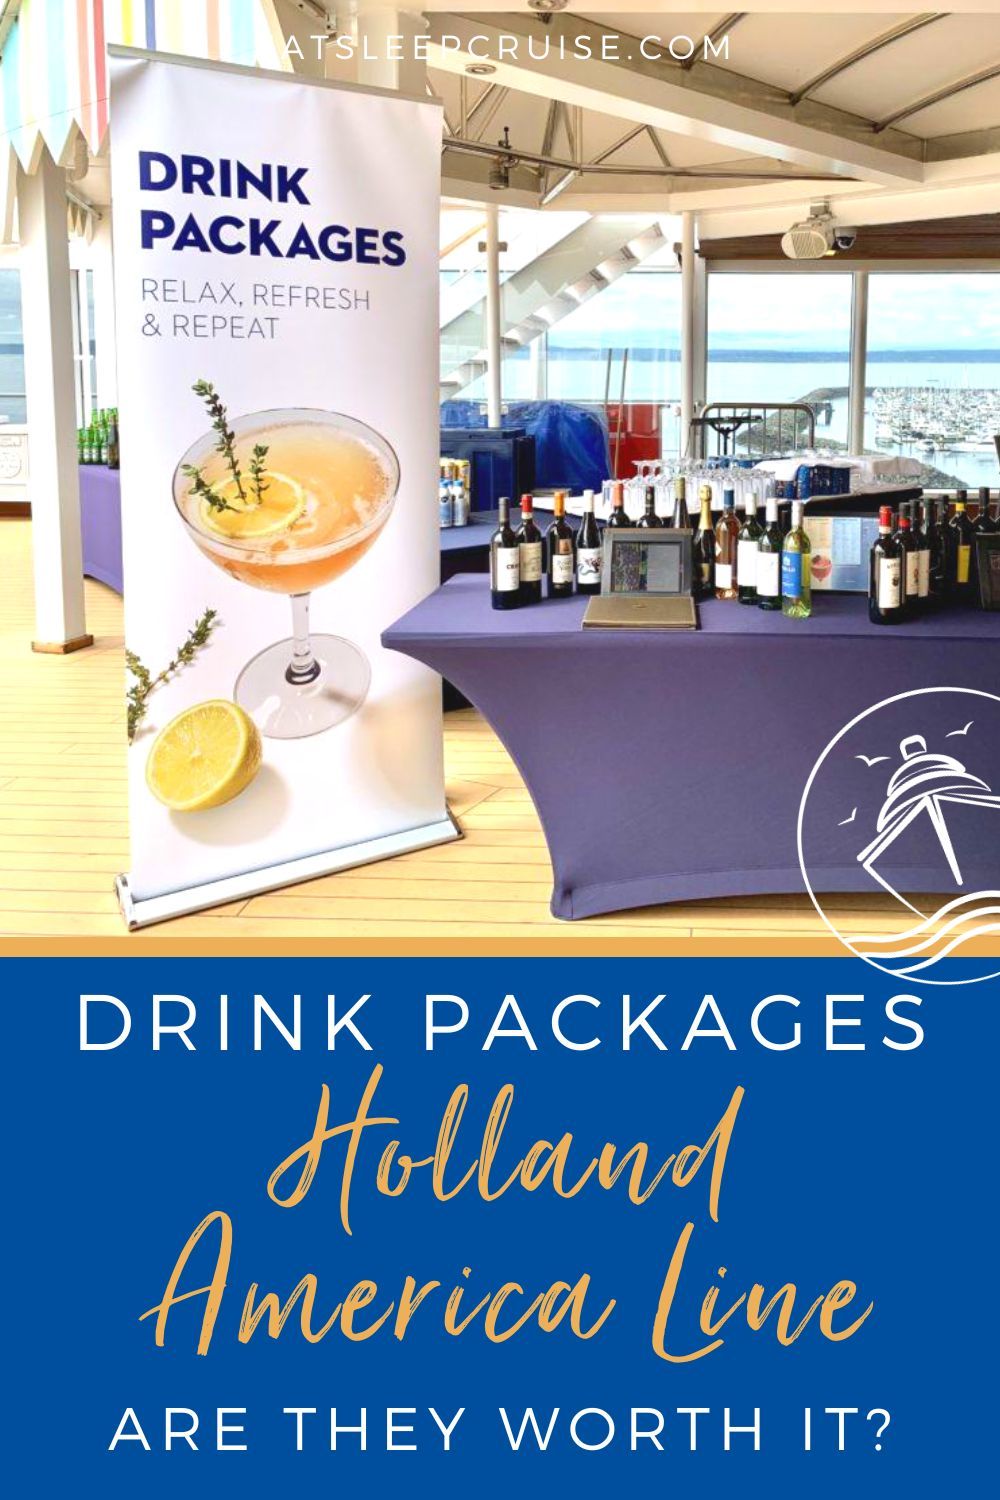 Do you save money with Holland America Line Drink Packages